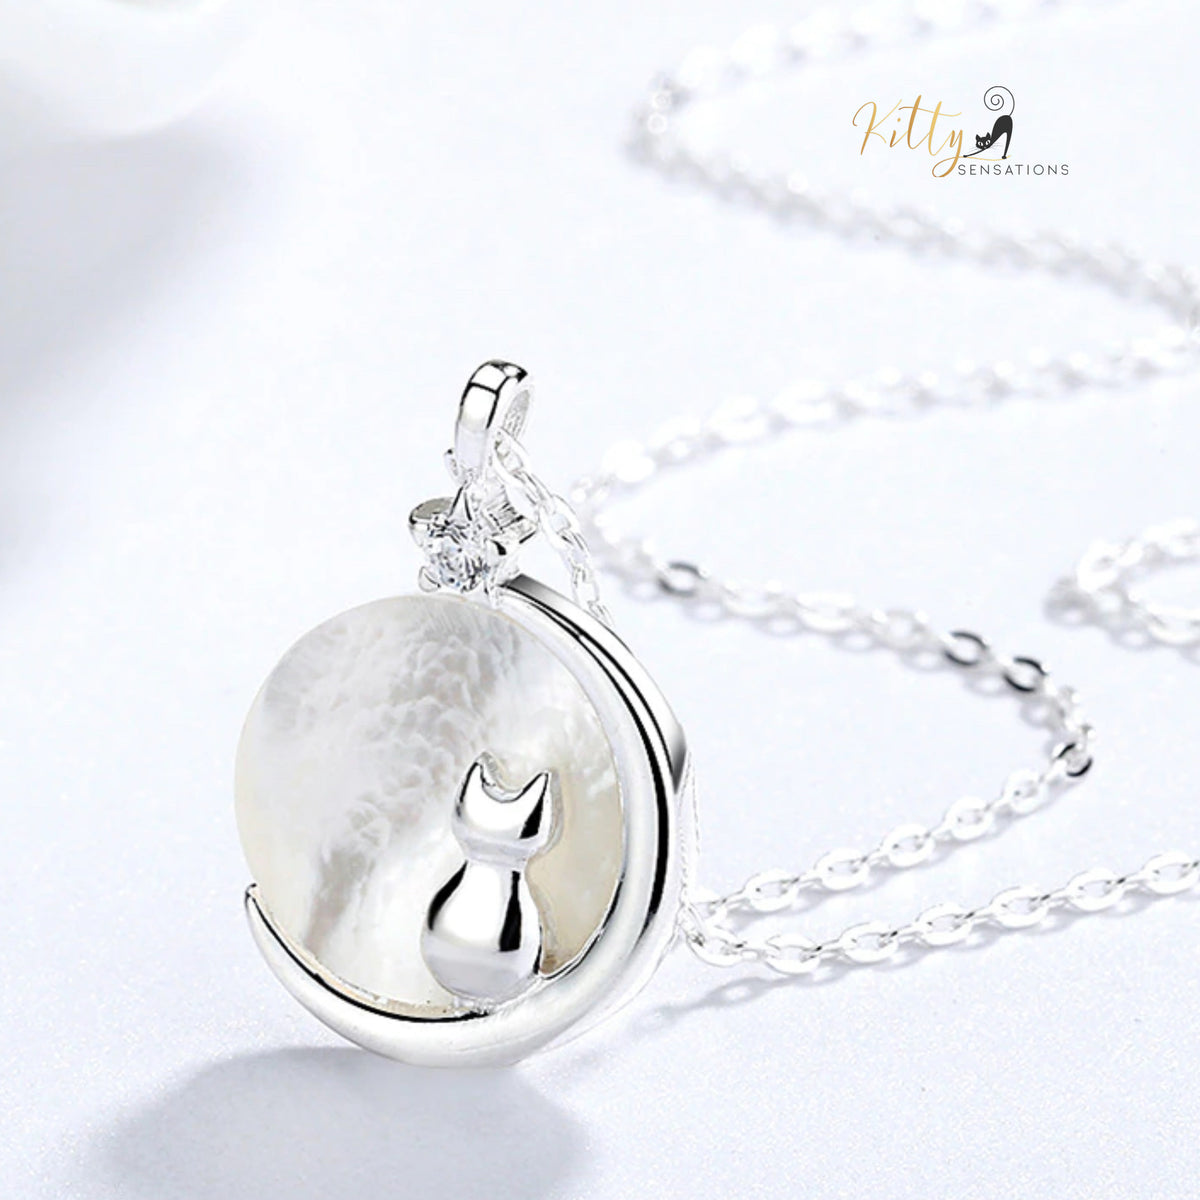 www.KittySensations.com Mother-of-Pearl Moon Kitty Necklace in Solid 925 Sterling Silver (Platinum or Gold Plated) ($35.85): https://www.kittysensations.com/products/mother-of-pearl-moon-kitty-necklace-in-solid-925-sterling-silver-platinum-or-gold-plated?variant=40121008848962